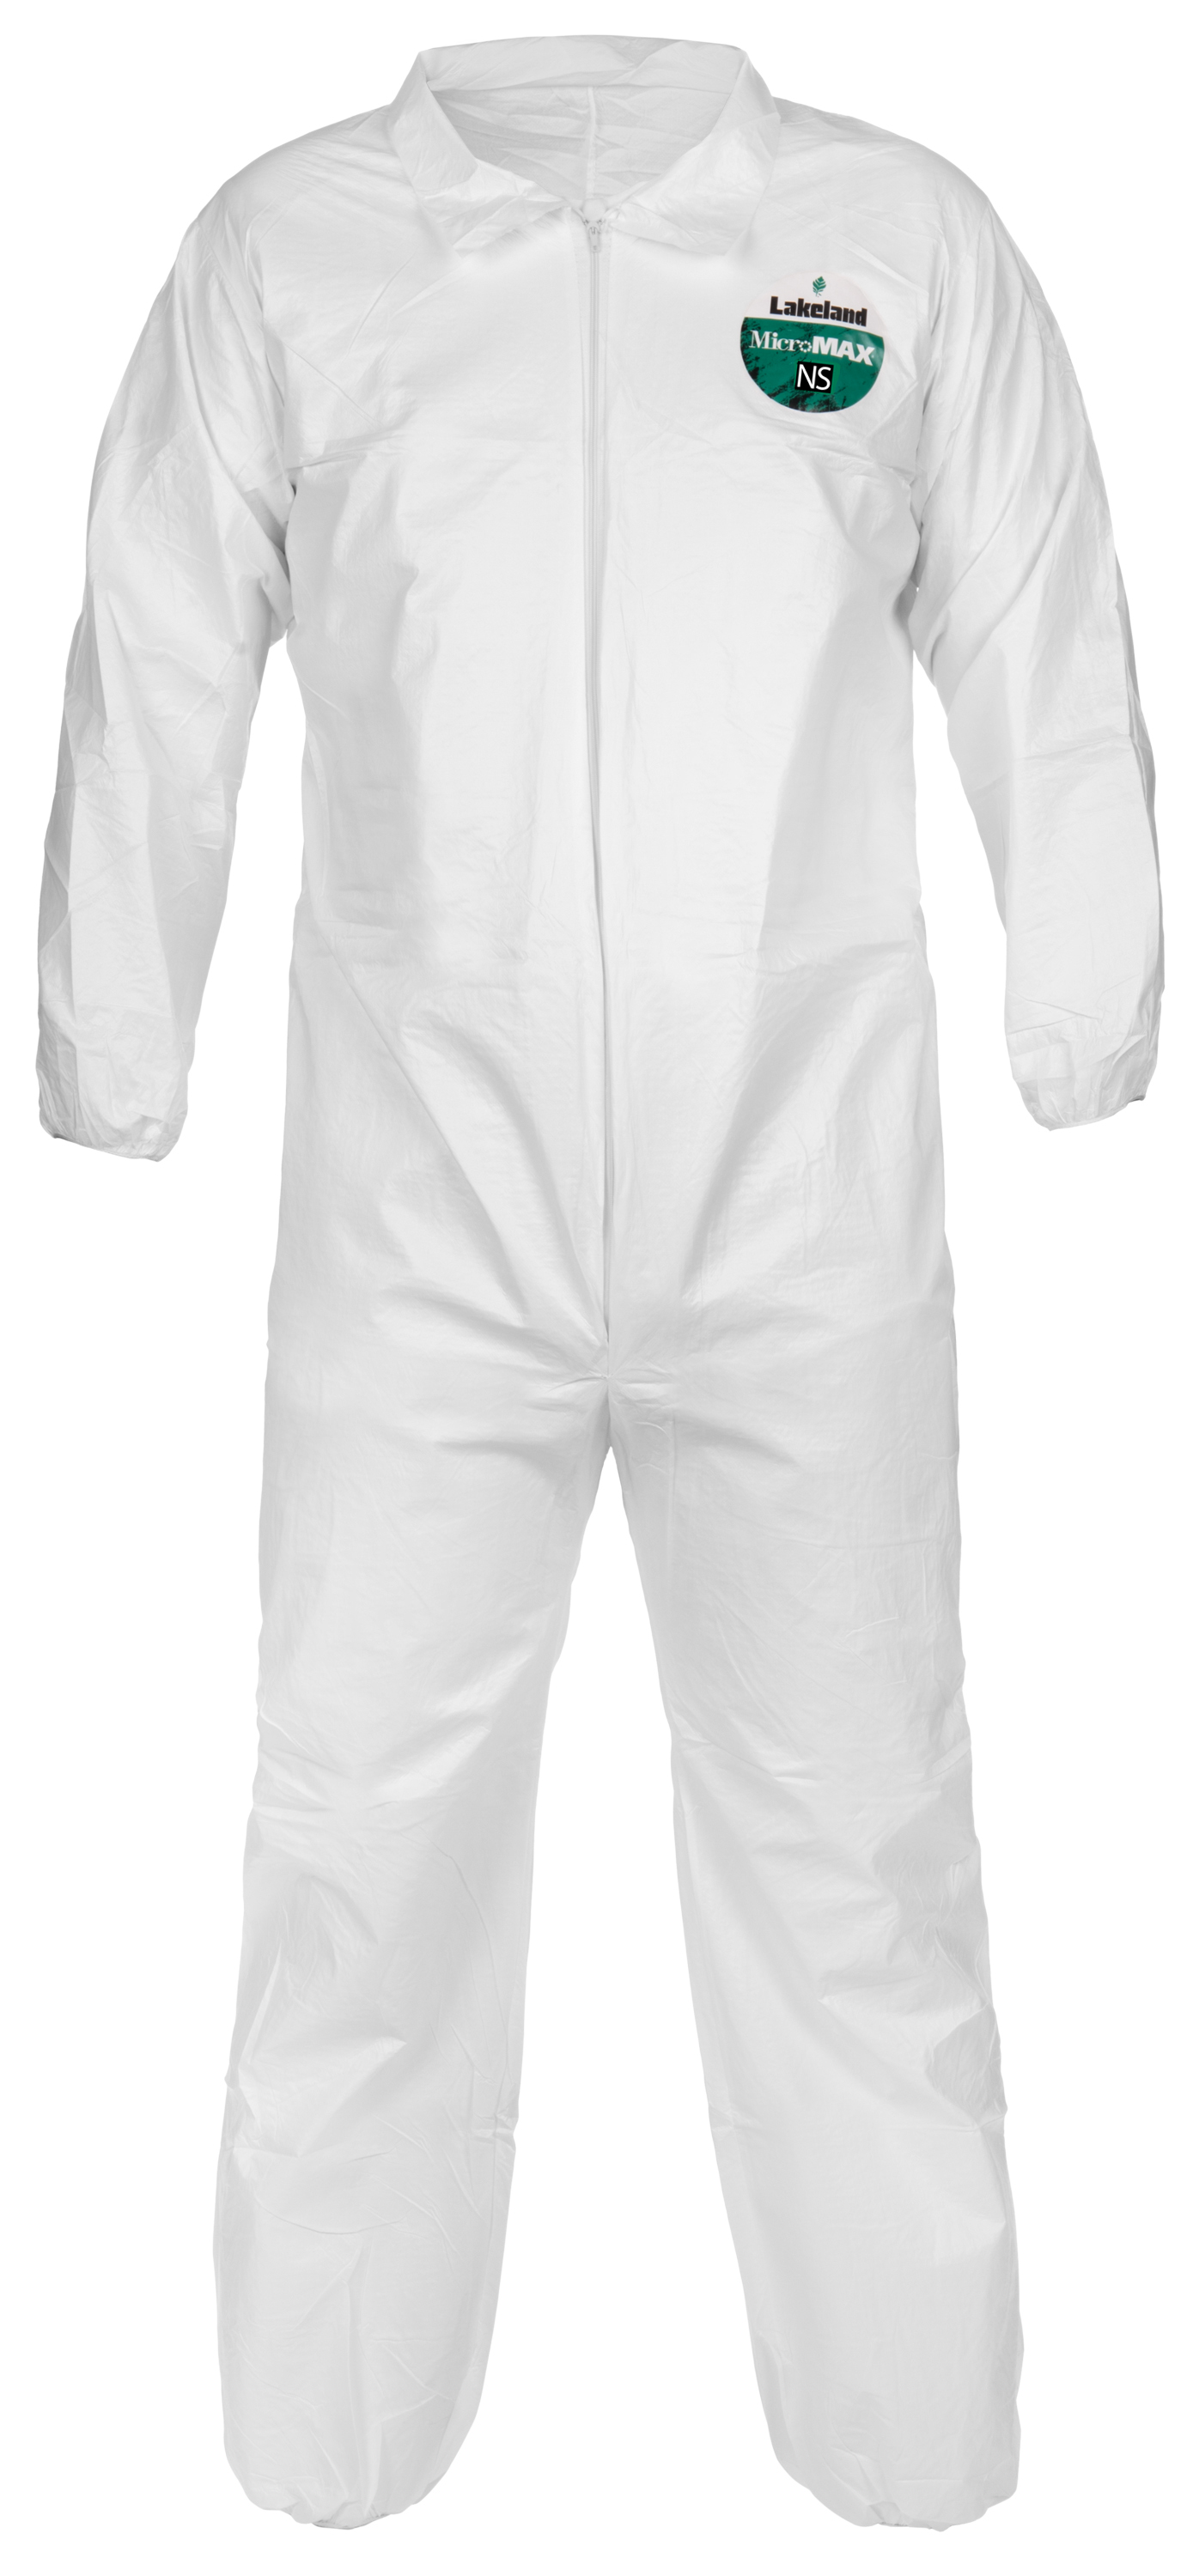 Lakeland Micromax NS 4xl Coveralls CTL412 Case of 25 for sale online 